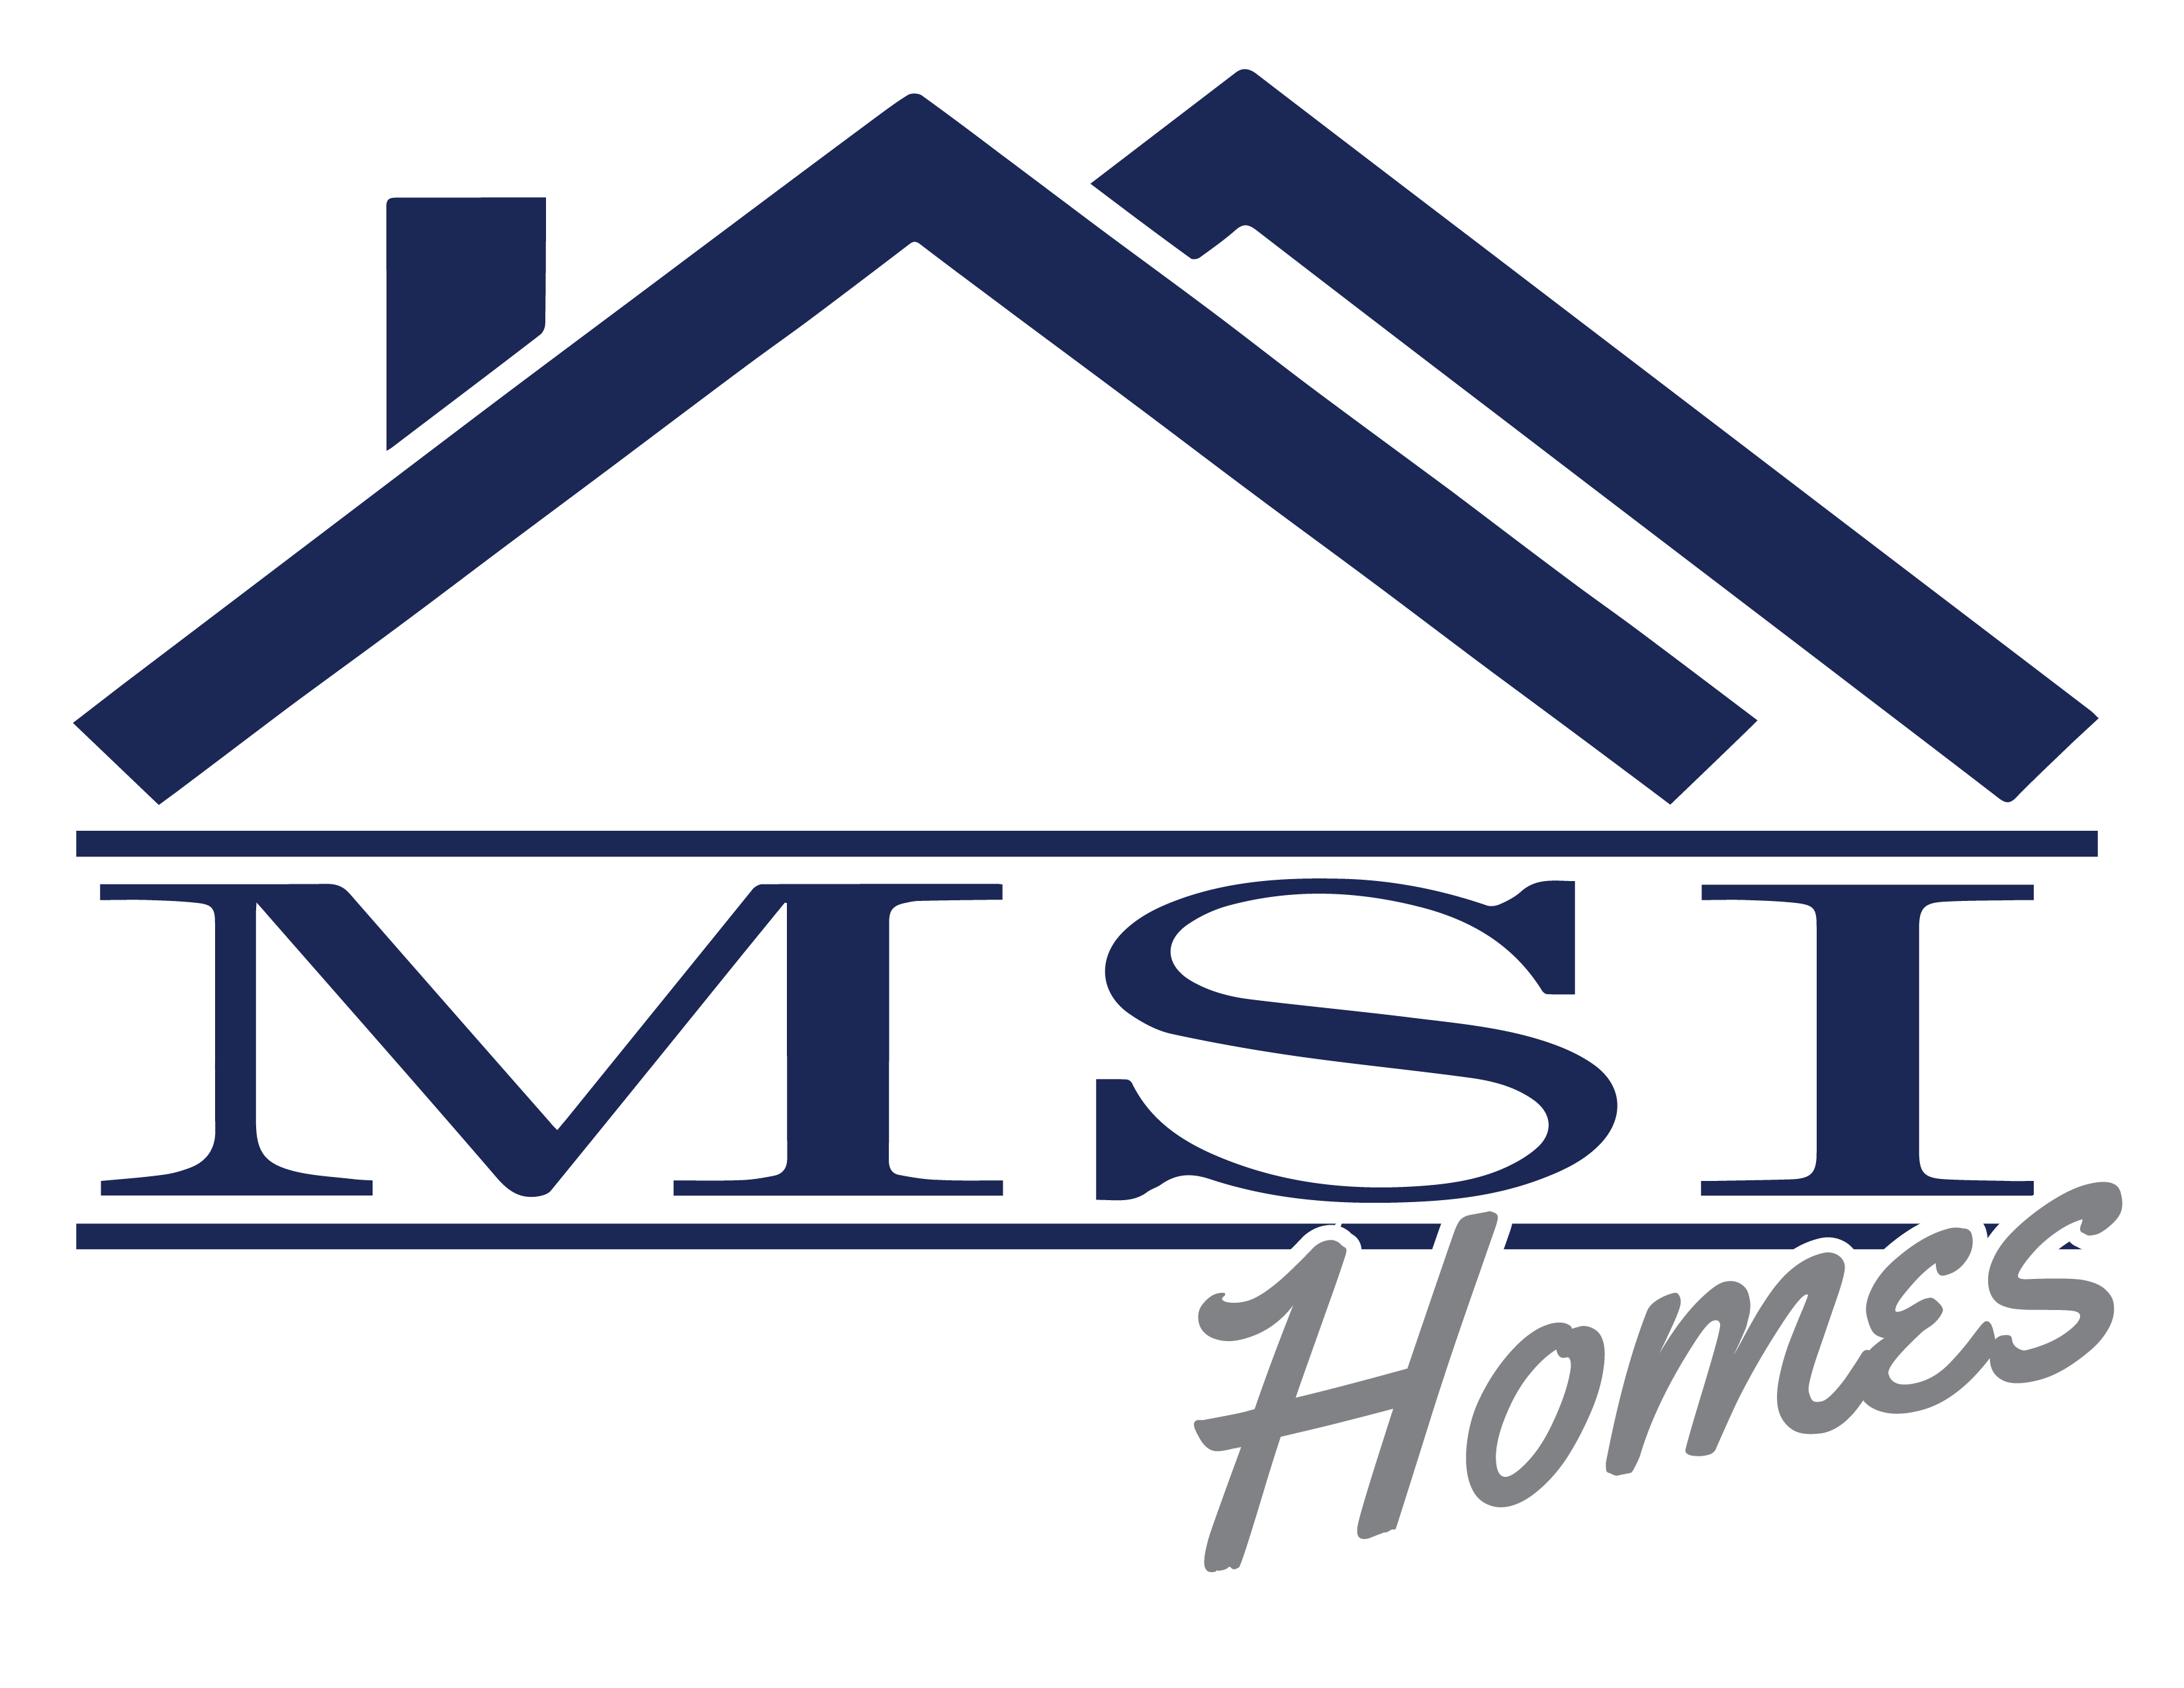 logo_homes MidState Investments Clarksville, TN